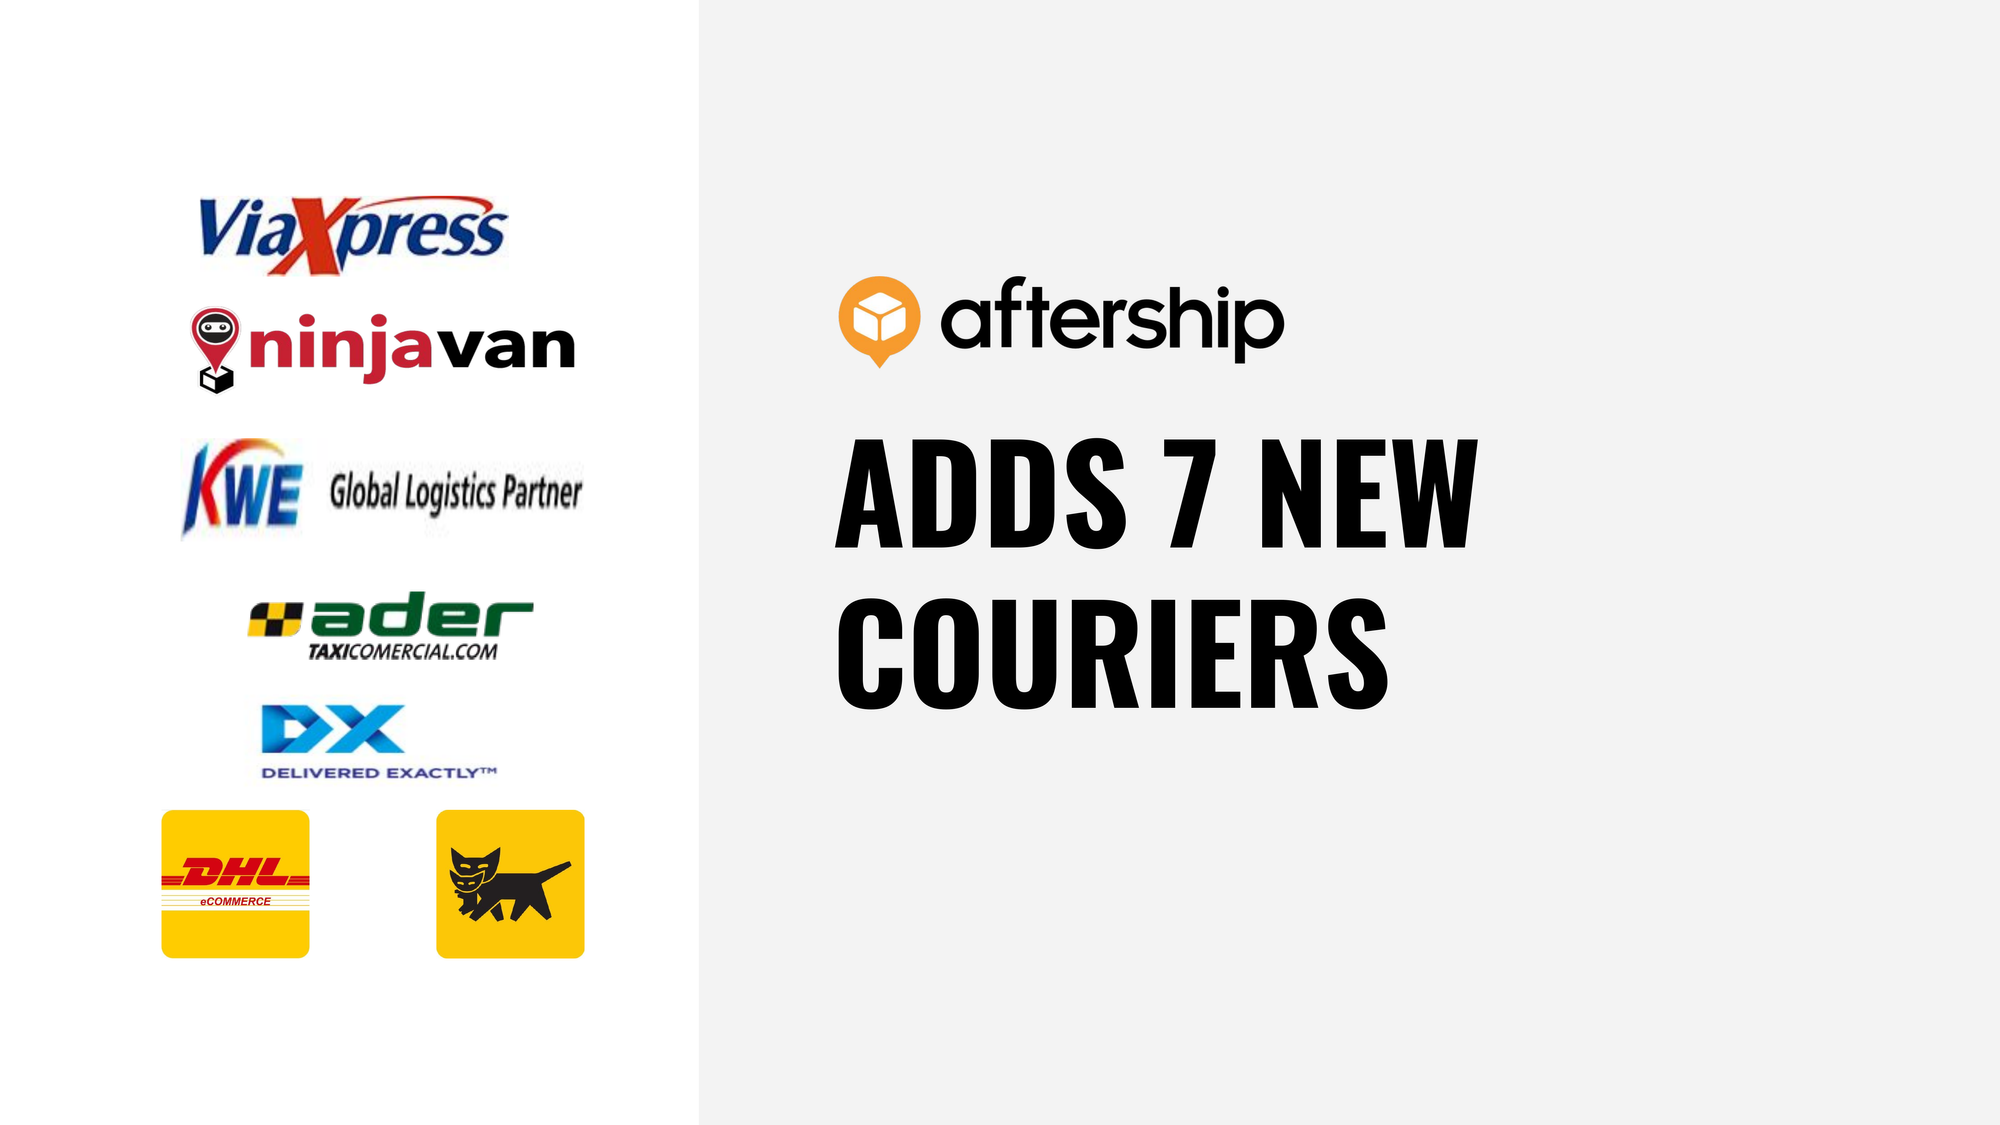 AfterShip adds 7 new couriers this week (28 Sep 2020 to 2 Oct 2020)